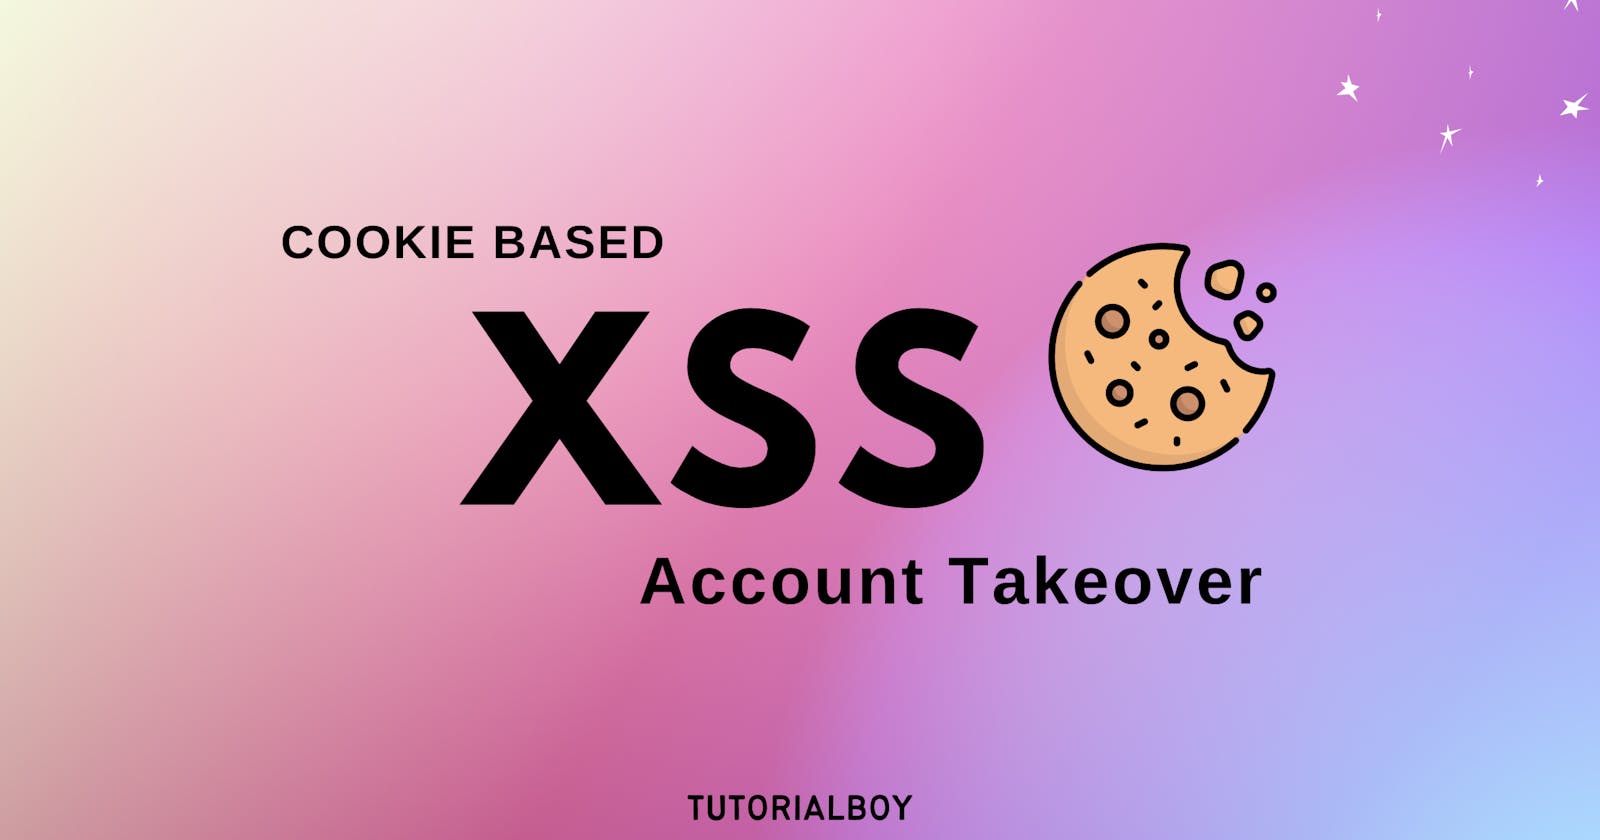 Turning cookie based XSS into account takeover